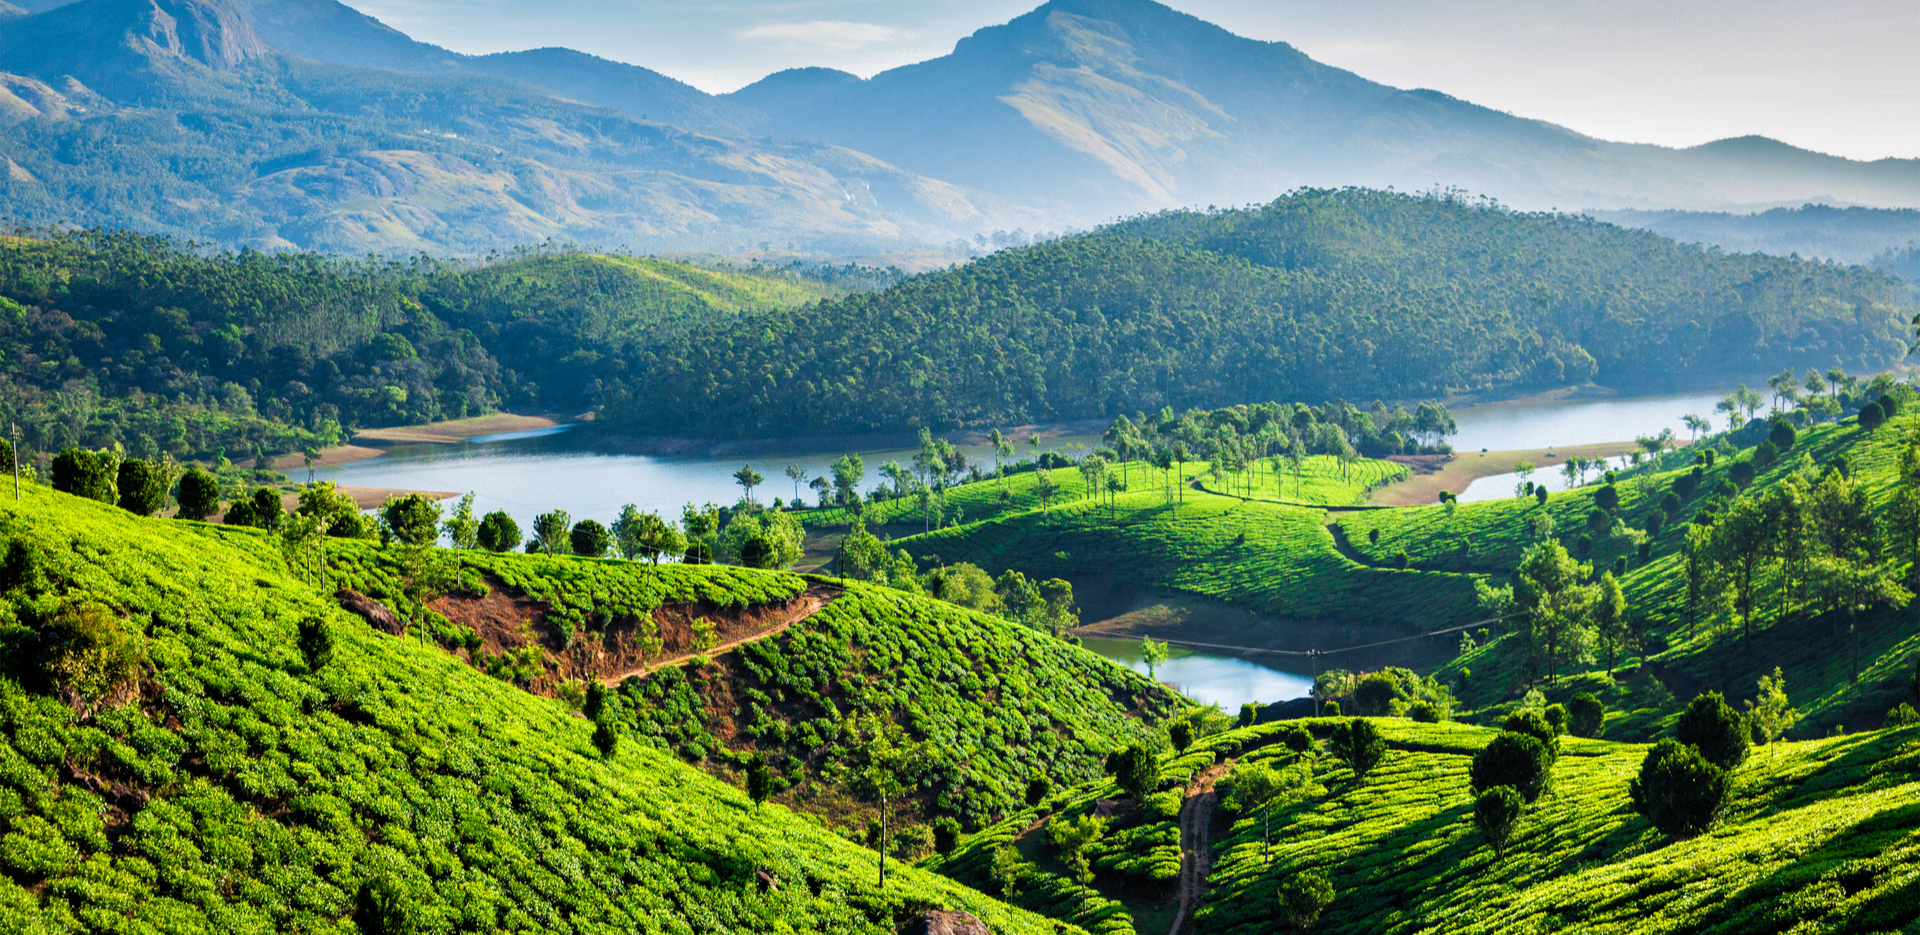 5 Most Popular Historical Places In And Around Munnar, Kerala